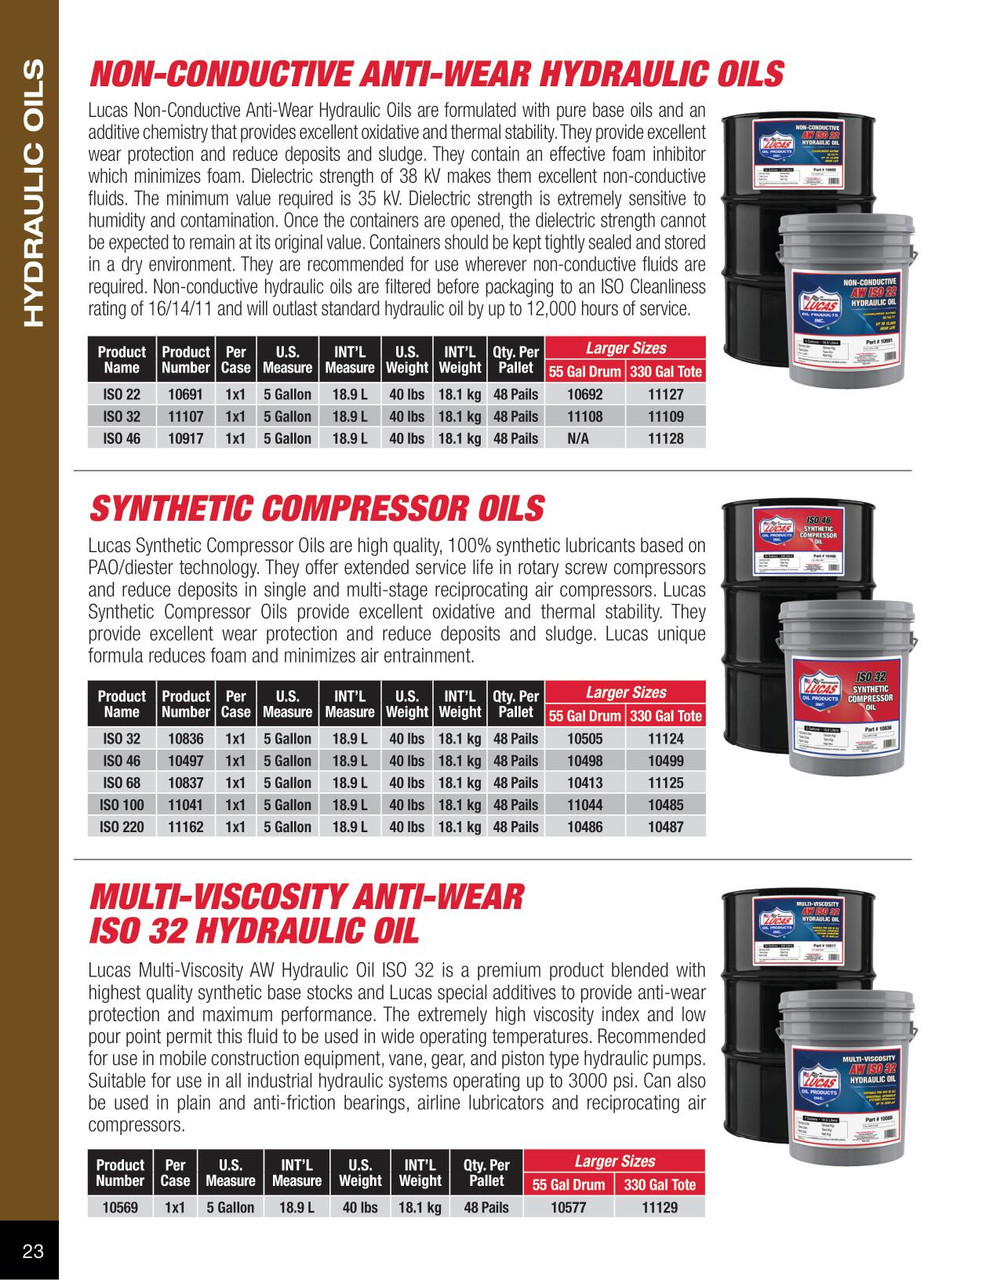 Synthetic Compressor Oil ISO 46 18.9L Pail  10497